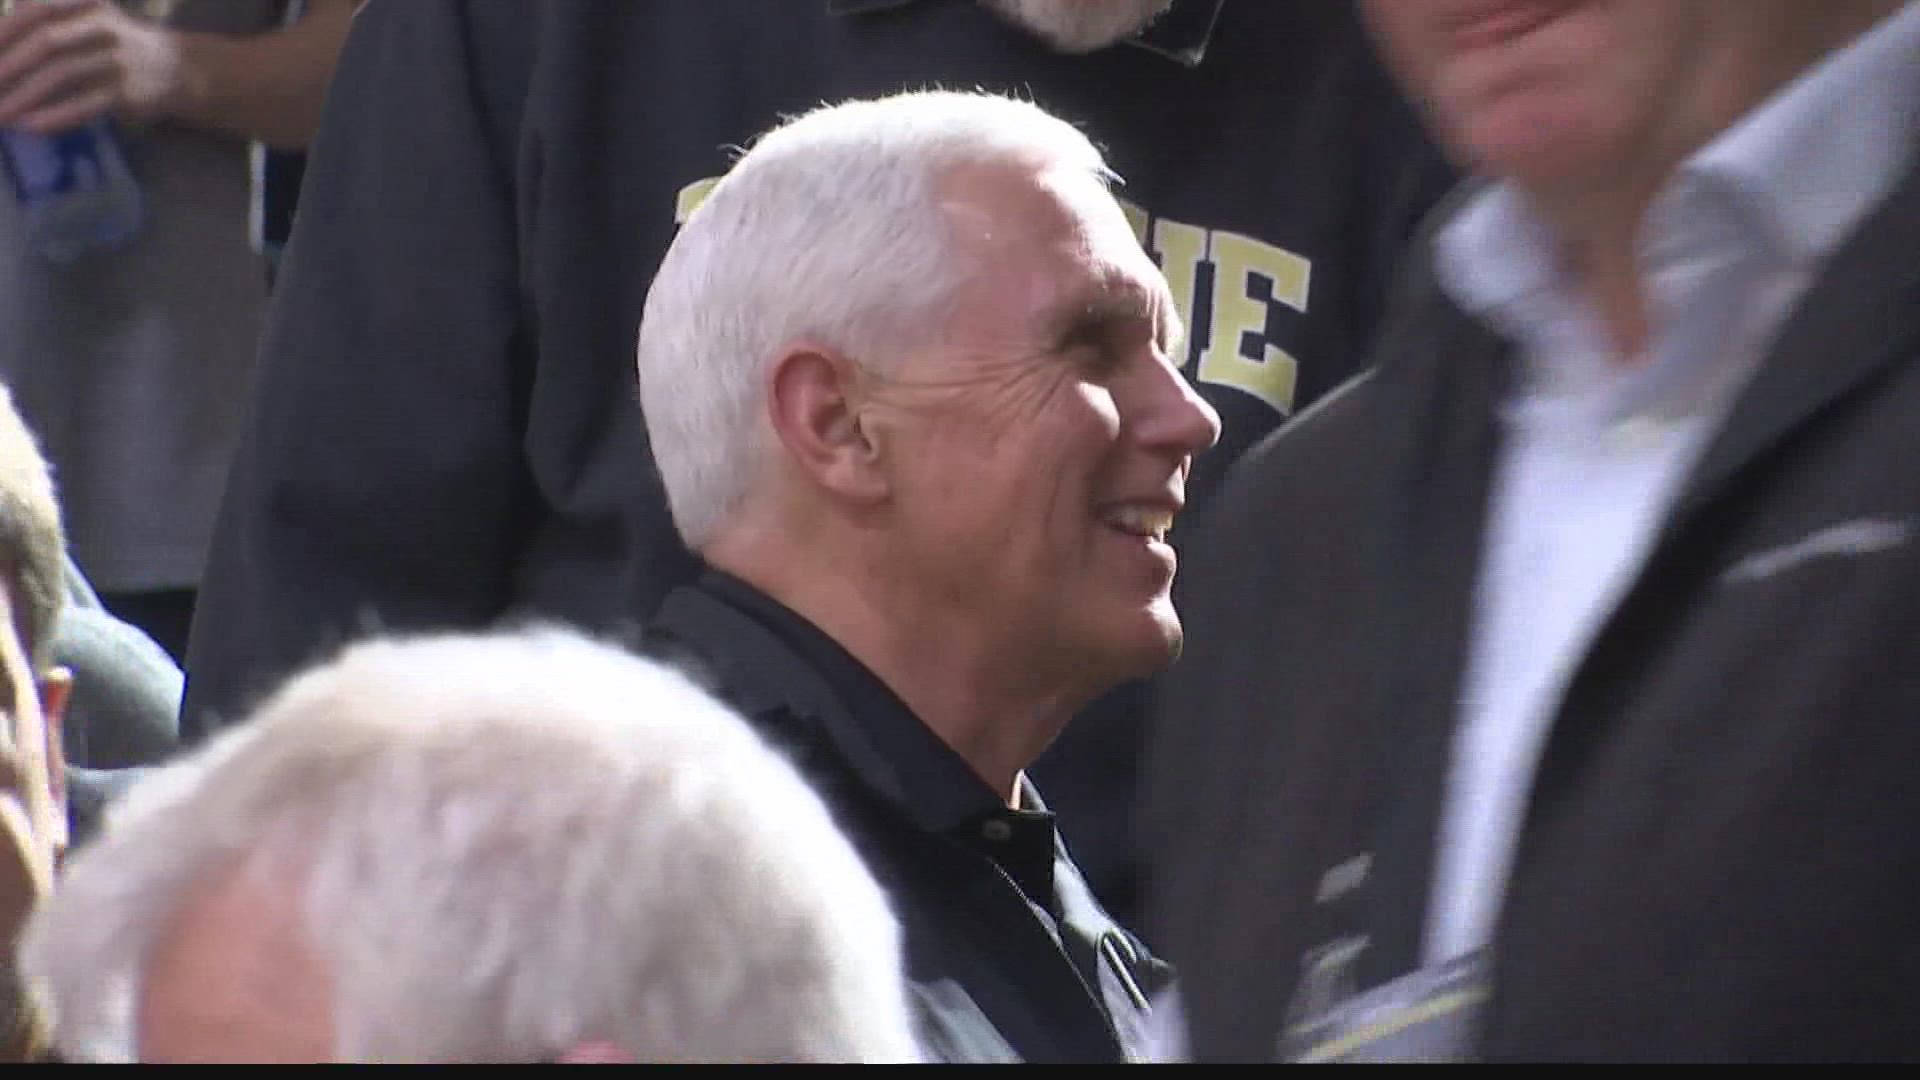 Former Vice President Mike Pence was at Mackey Arena on Saturday to watch archrivals IU and Purdue compete in their last regular-season game.